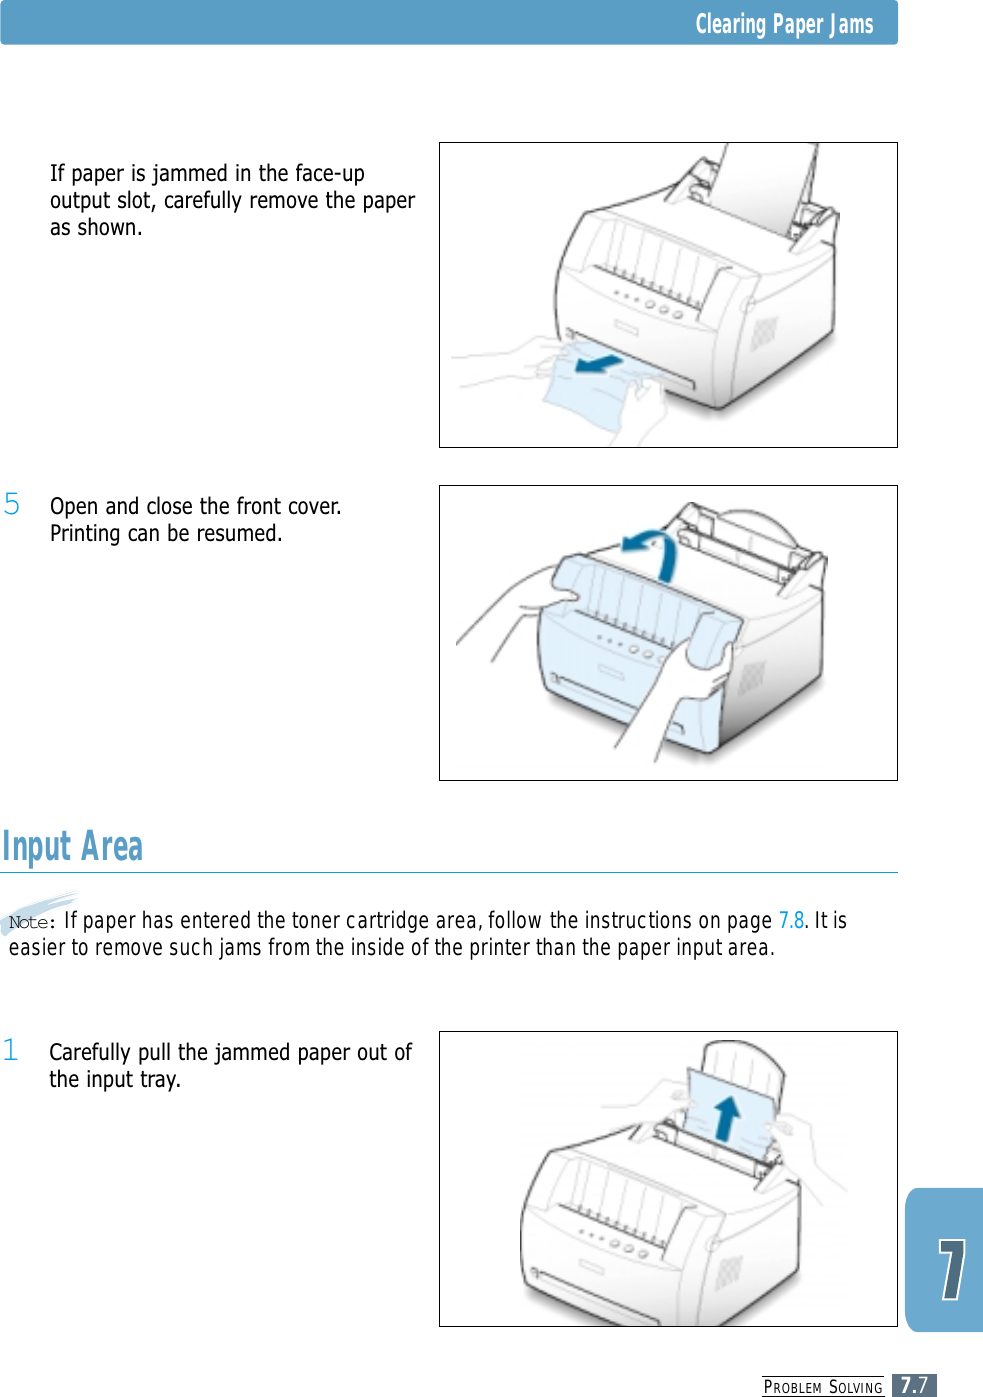 PROBLEM SOLVING7.7Note: If paper has entered the toner cartridge area, follow the instructions on page 7.8. It iseasier to remove such jams from the inside of the printer than the paper input area.Input Area1 Carefully pull the jammed paper out ofthe input tray.5 Open and close the front cover.Printing can be resumed.5 If paper is jammed in the face-upoutput slot, carefully remove the paperas shown.Clearing Paper Jams